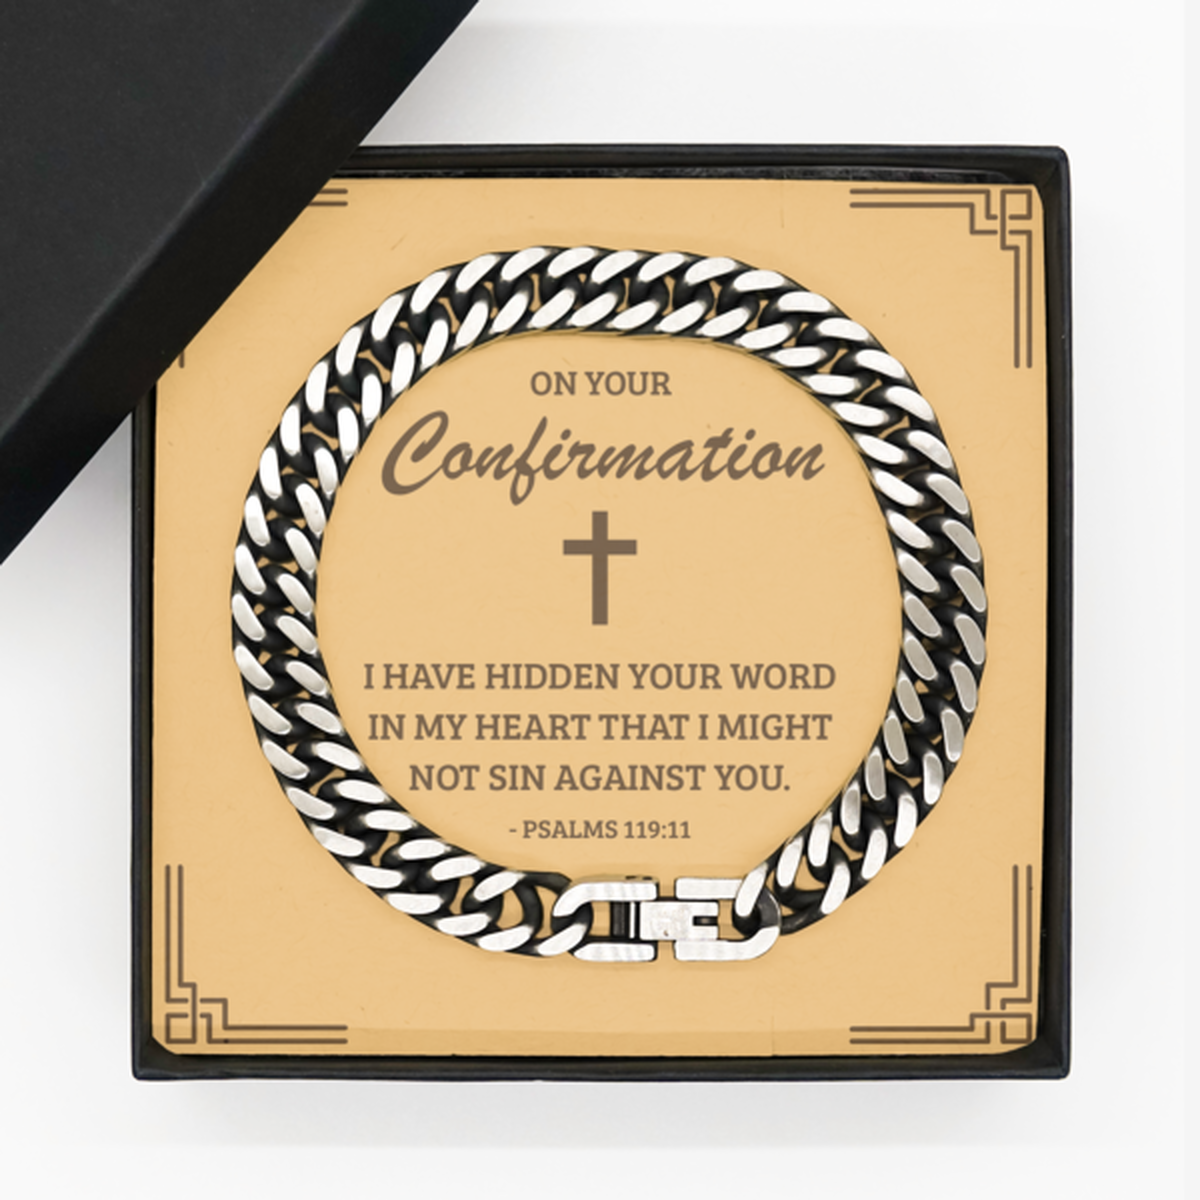 Confirmation Gifts for Teenage Boys, I have hidden your word in my heart, Cuban Link Chain Bracelet with Bible Verse Message Card, Religious Catholic Bracelet for Son, Grandson, Dad, Godfather